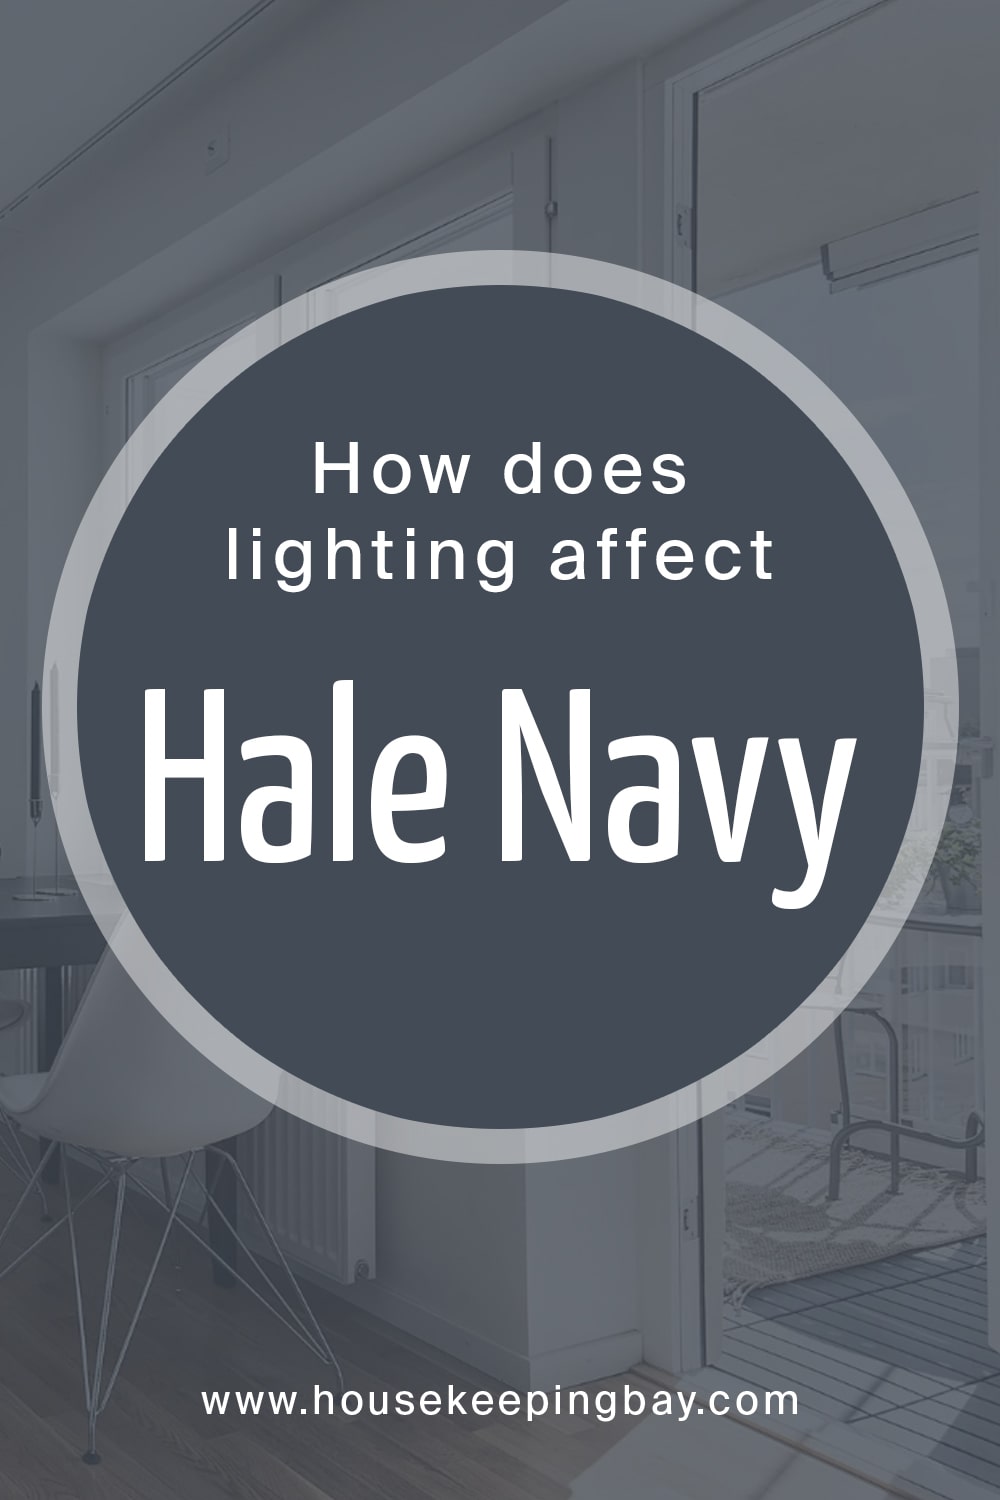 How does lighting affect Hale Navy